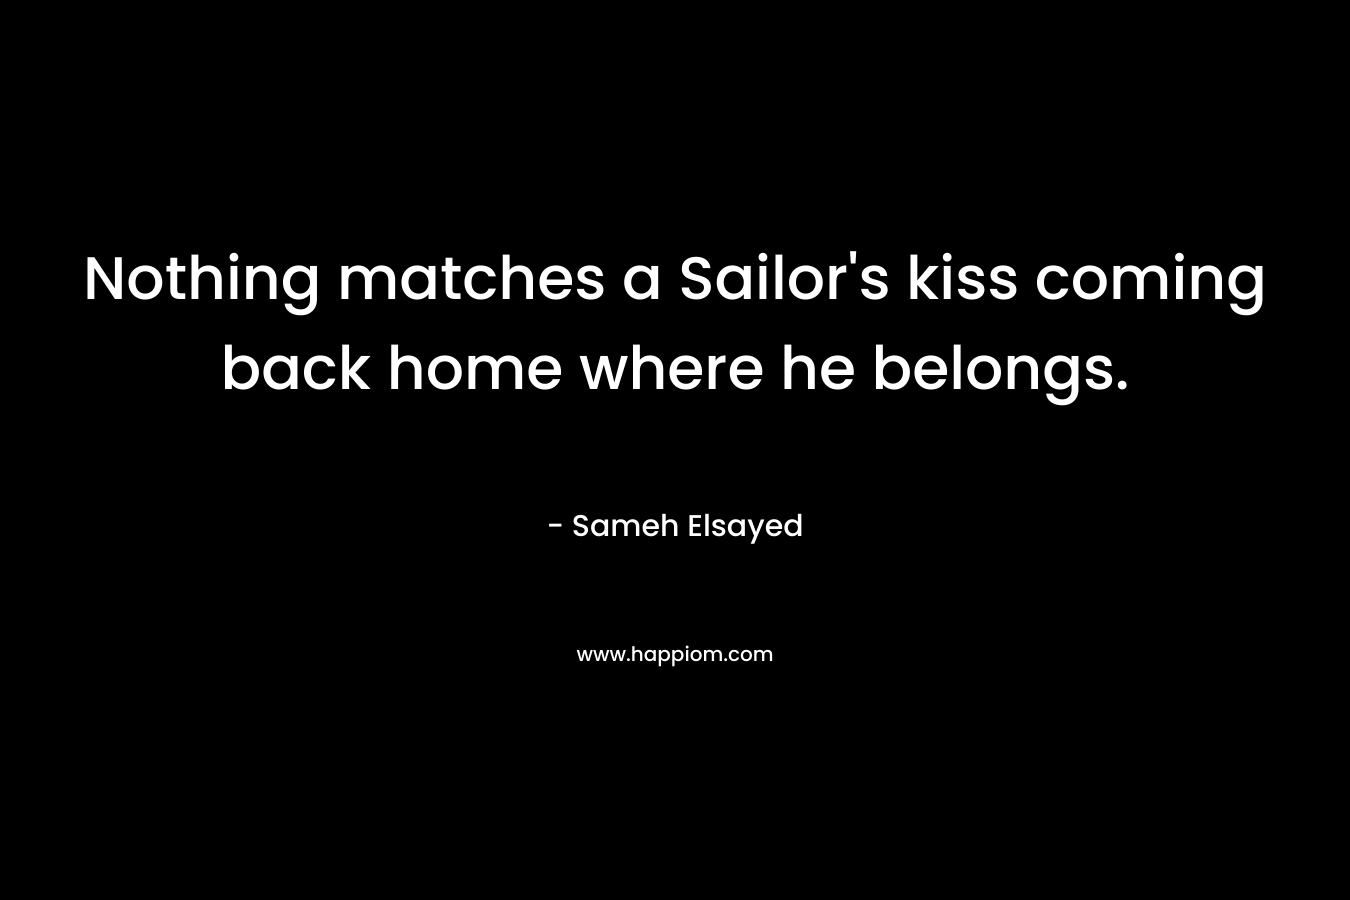 Nothing matches a Sailor's kiss coming back home where he belongs.